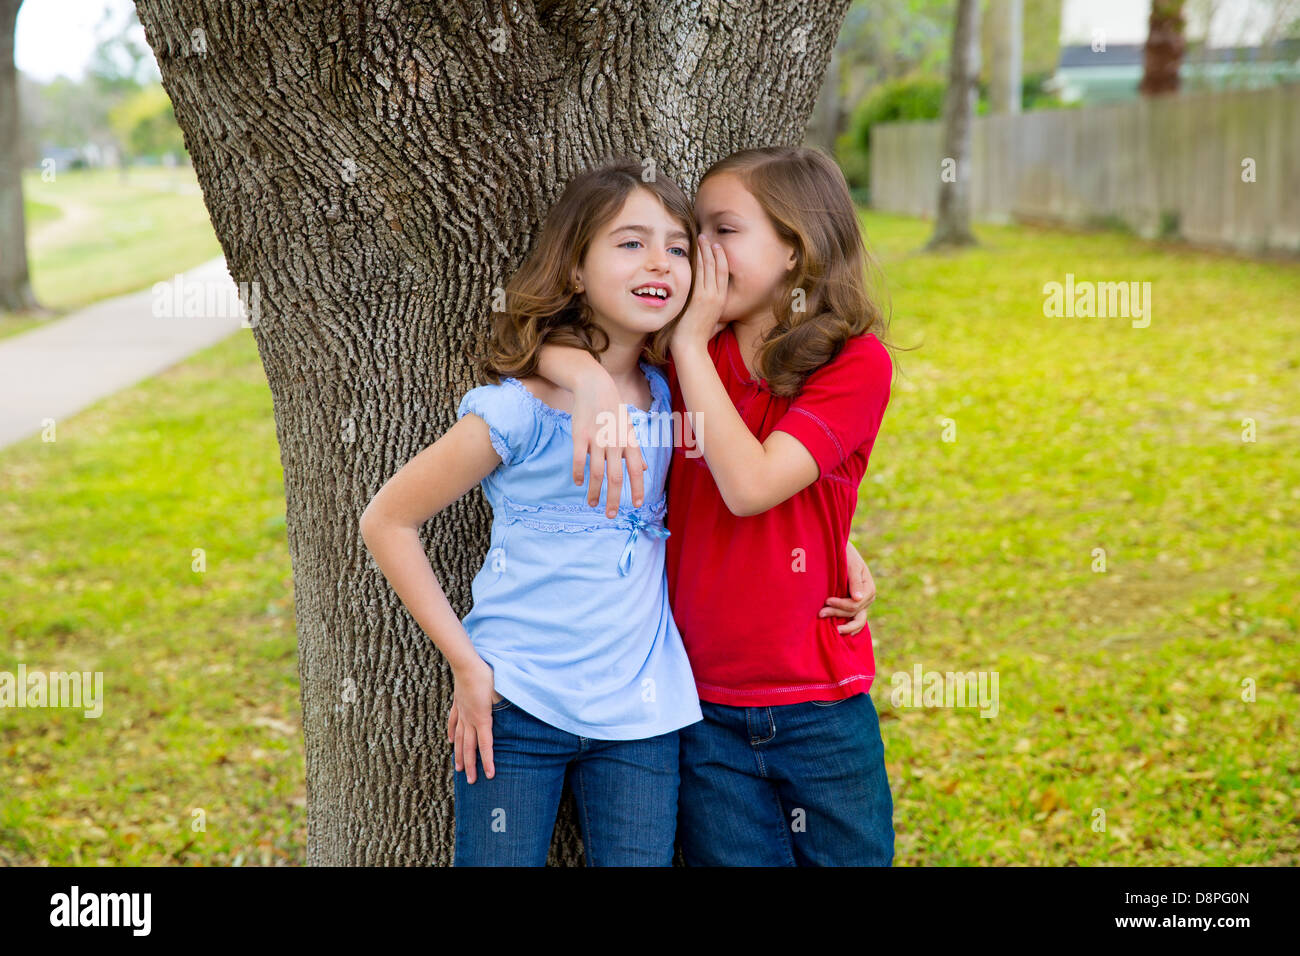 children kid friend girls whispering ear playing smiling in a park tree outdoor Stock Photo